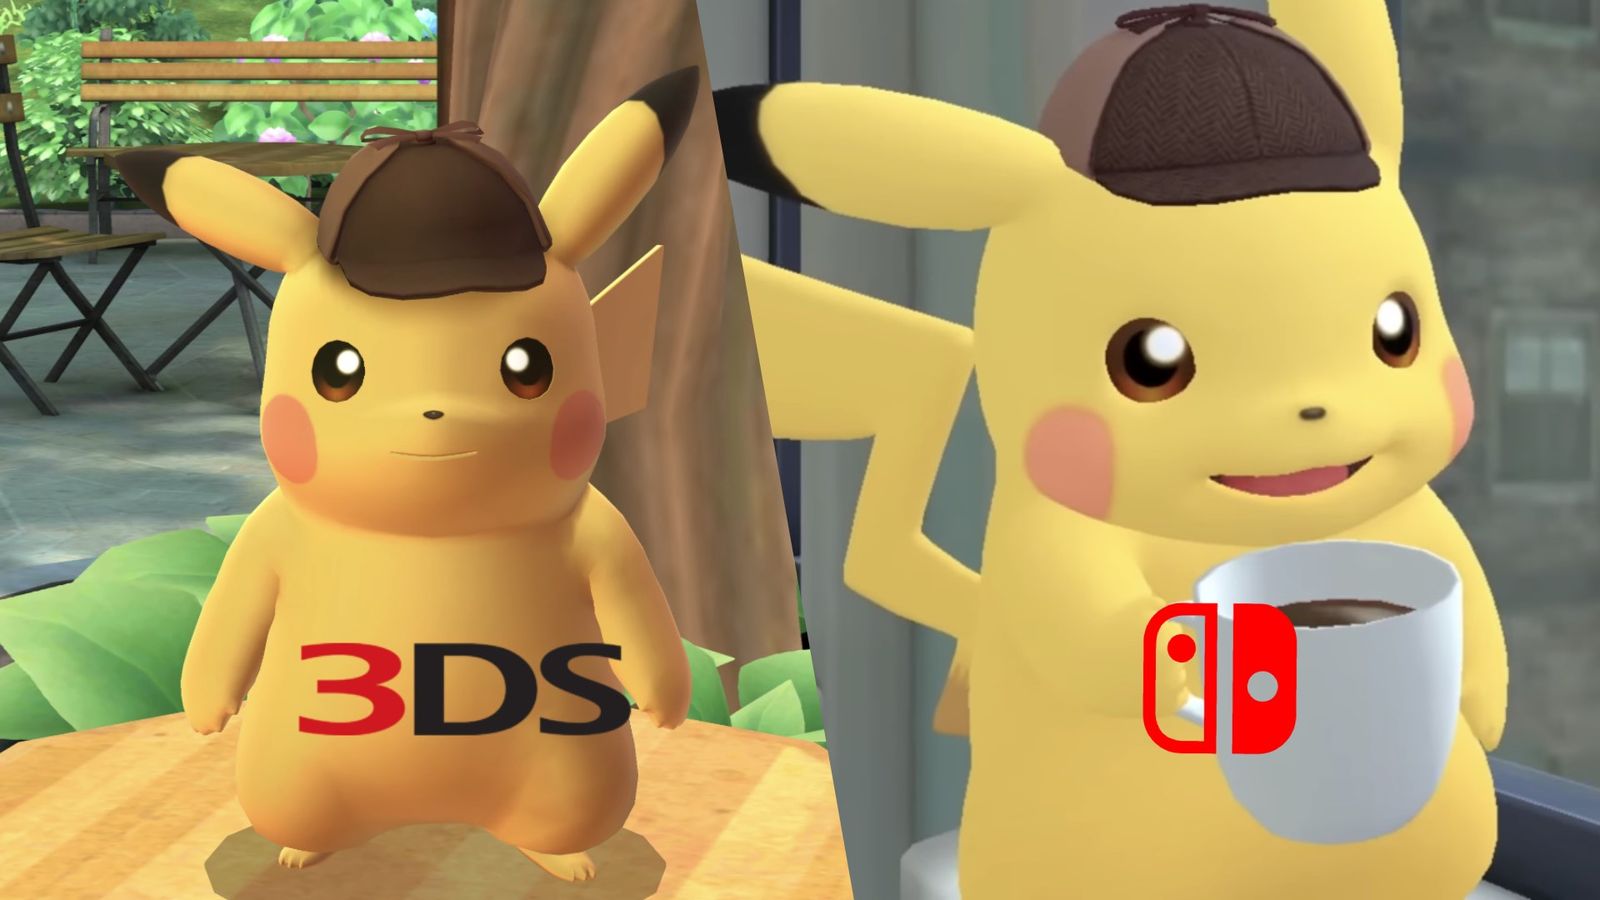 Detective Pikachu Returns looks worse than its 3DS original. Two versions of the character, 3DS on the left and Nintendo switch on the right. 